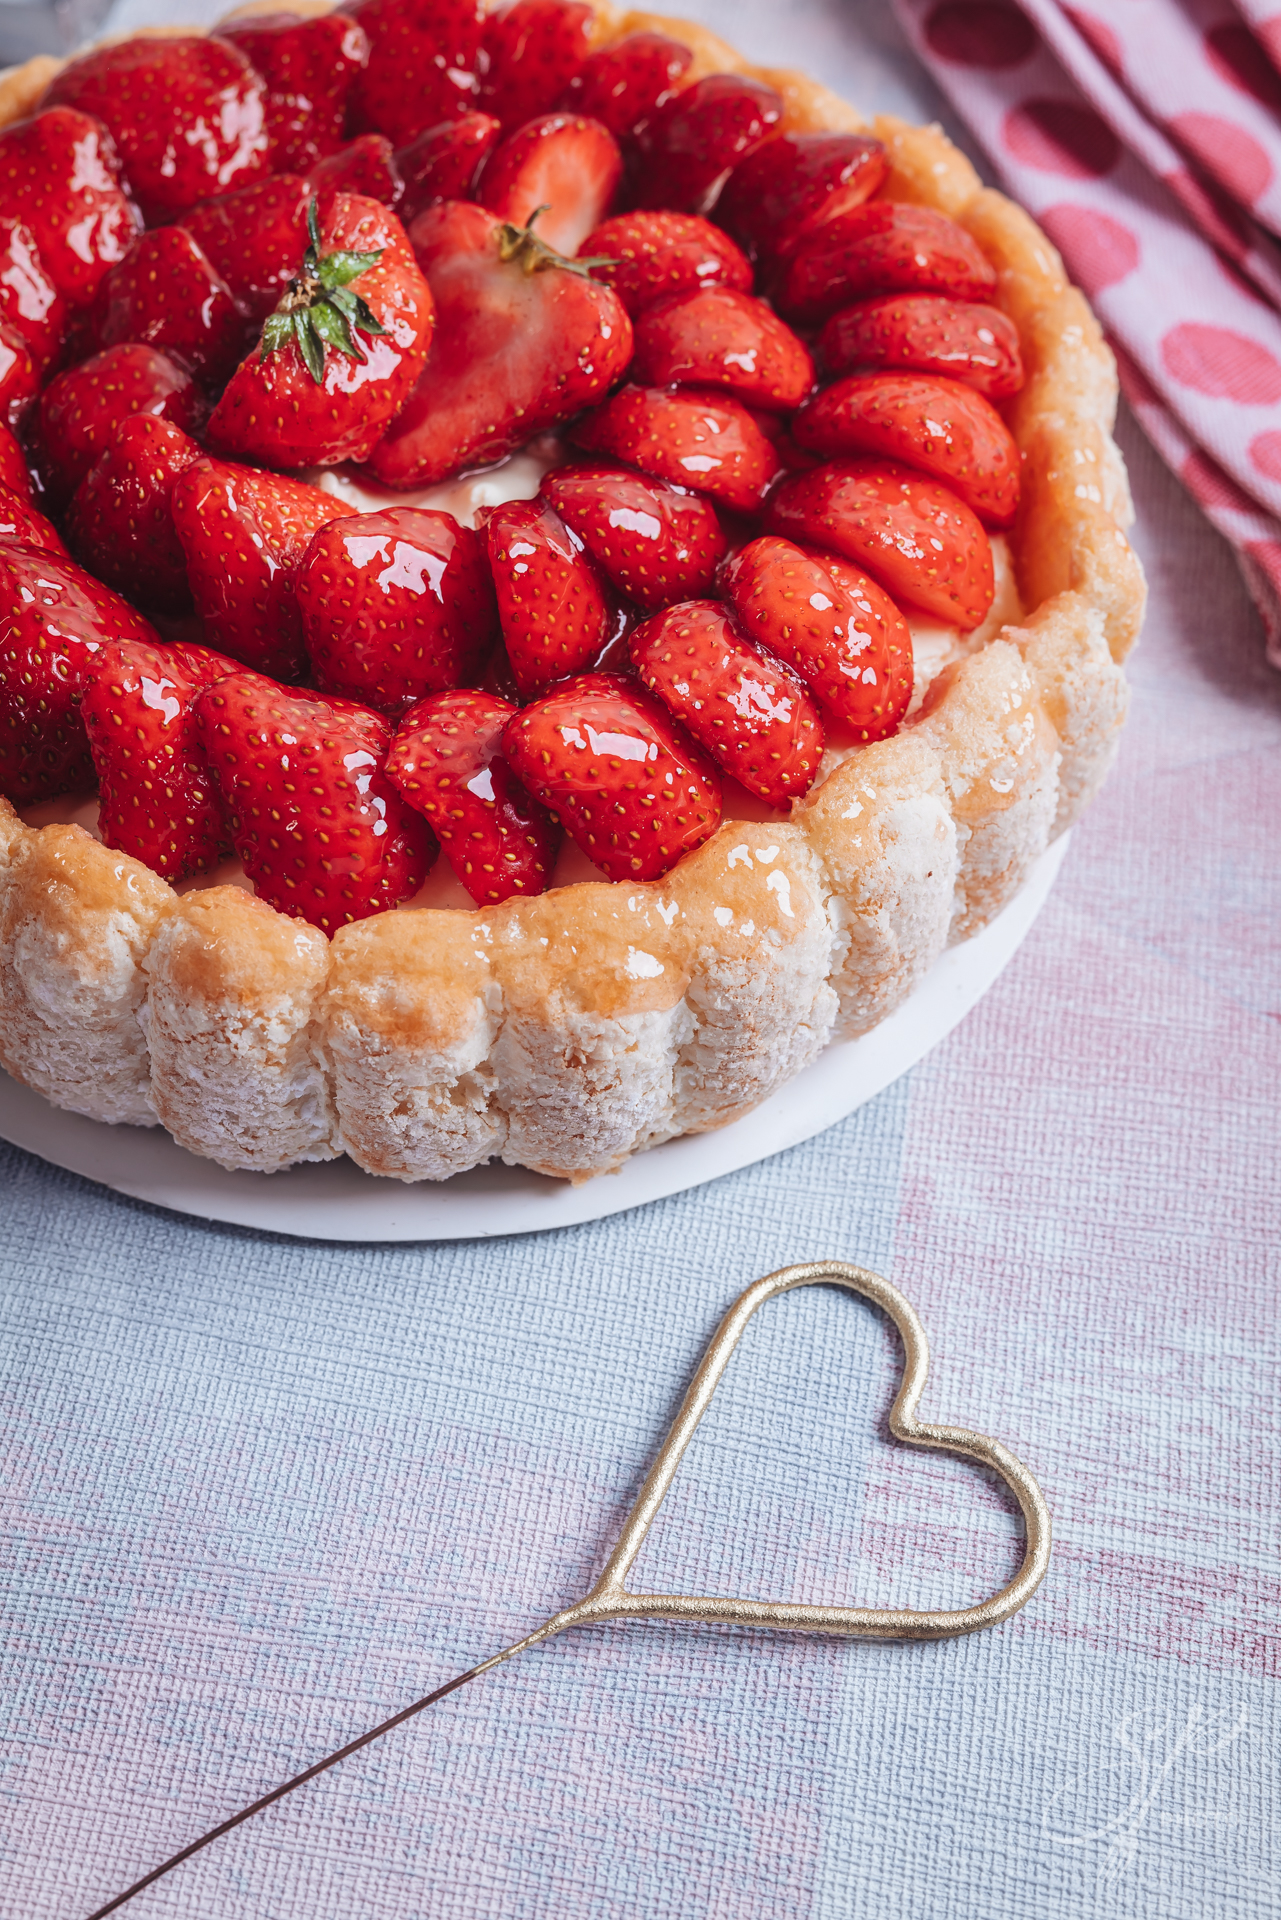 Delicious fresh Charlotte cake with strawberries